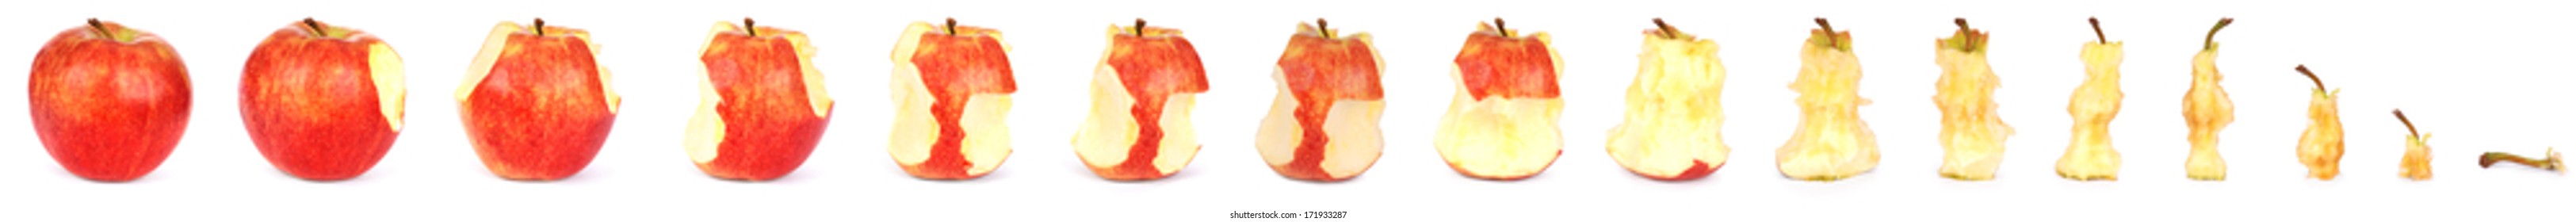 Sequential images of eating a red apple from a full apple to the stem. Clipping path separately for each apple